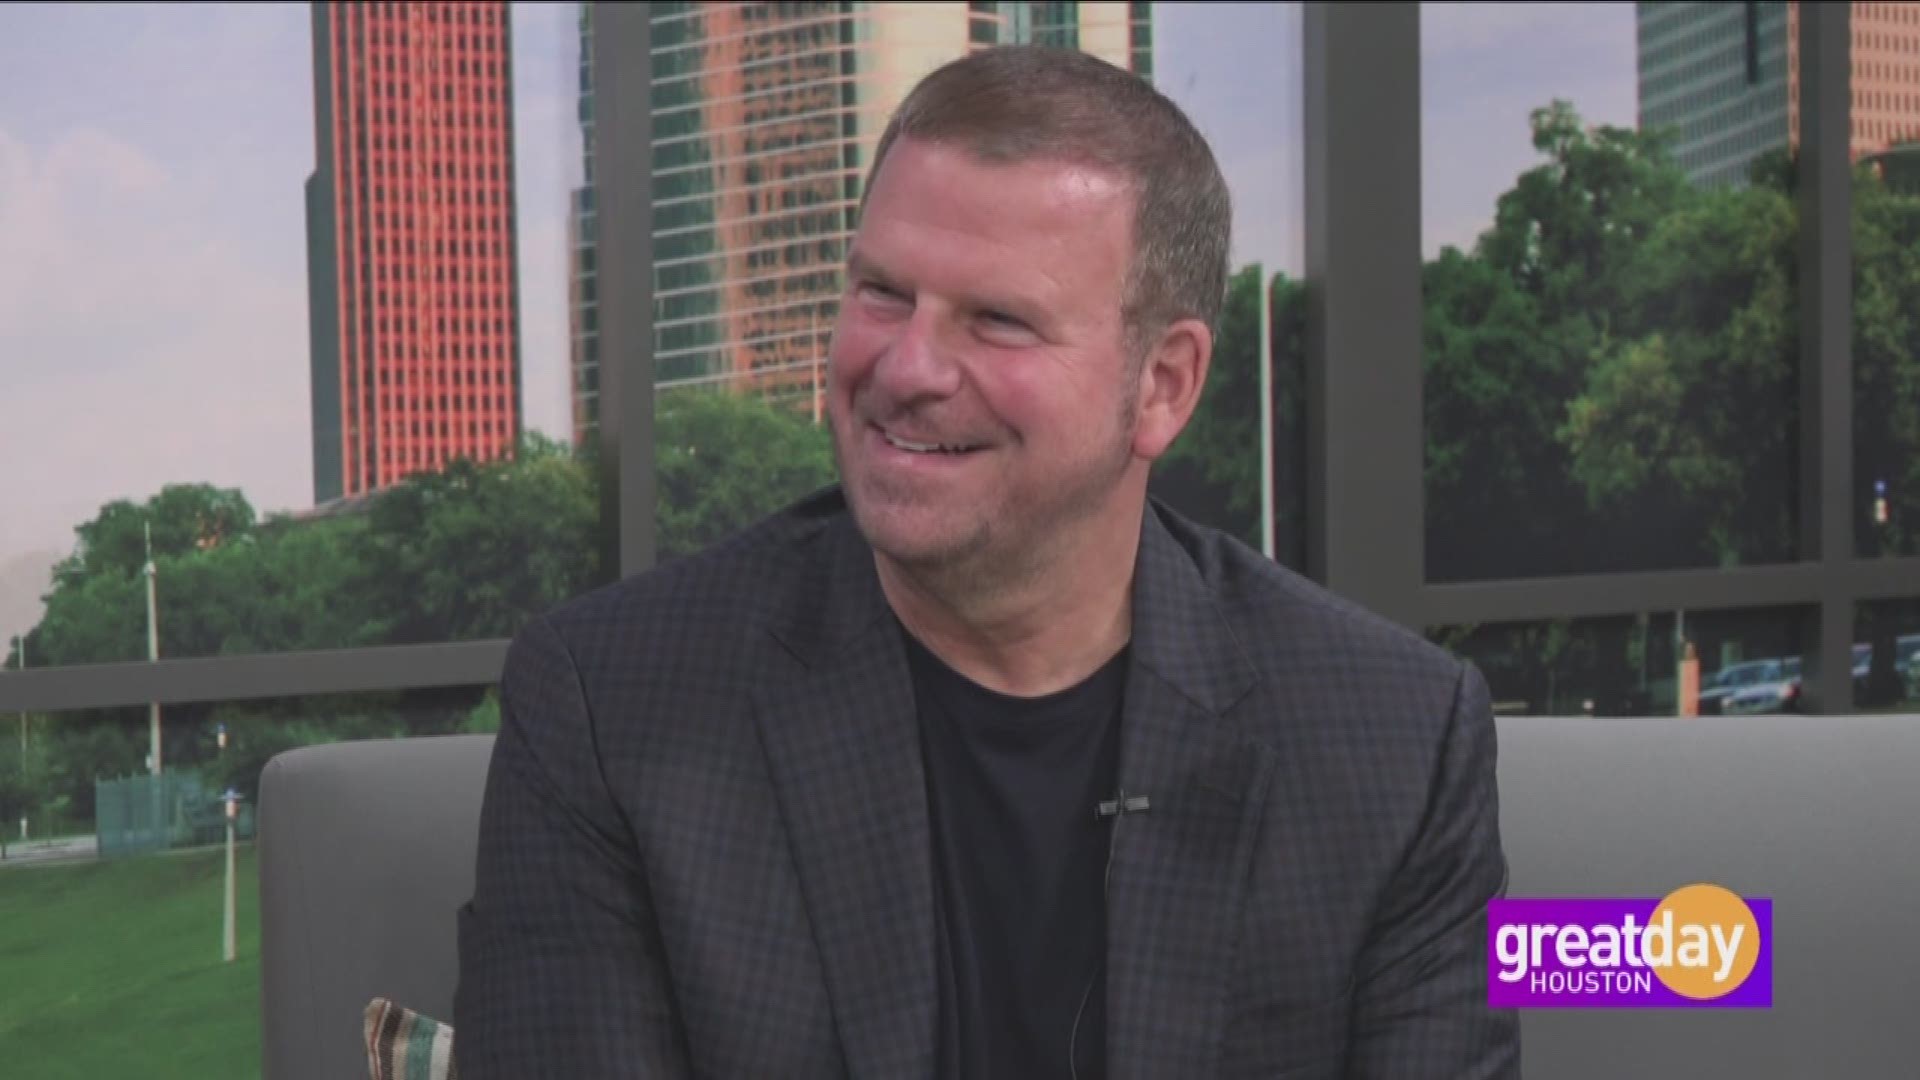 Houston Rockets owner Tilman Fertitta discusses what it takes to become a billionaire.